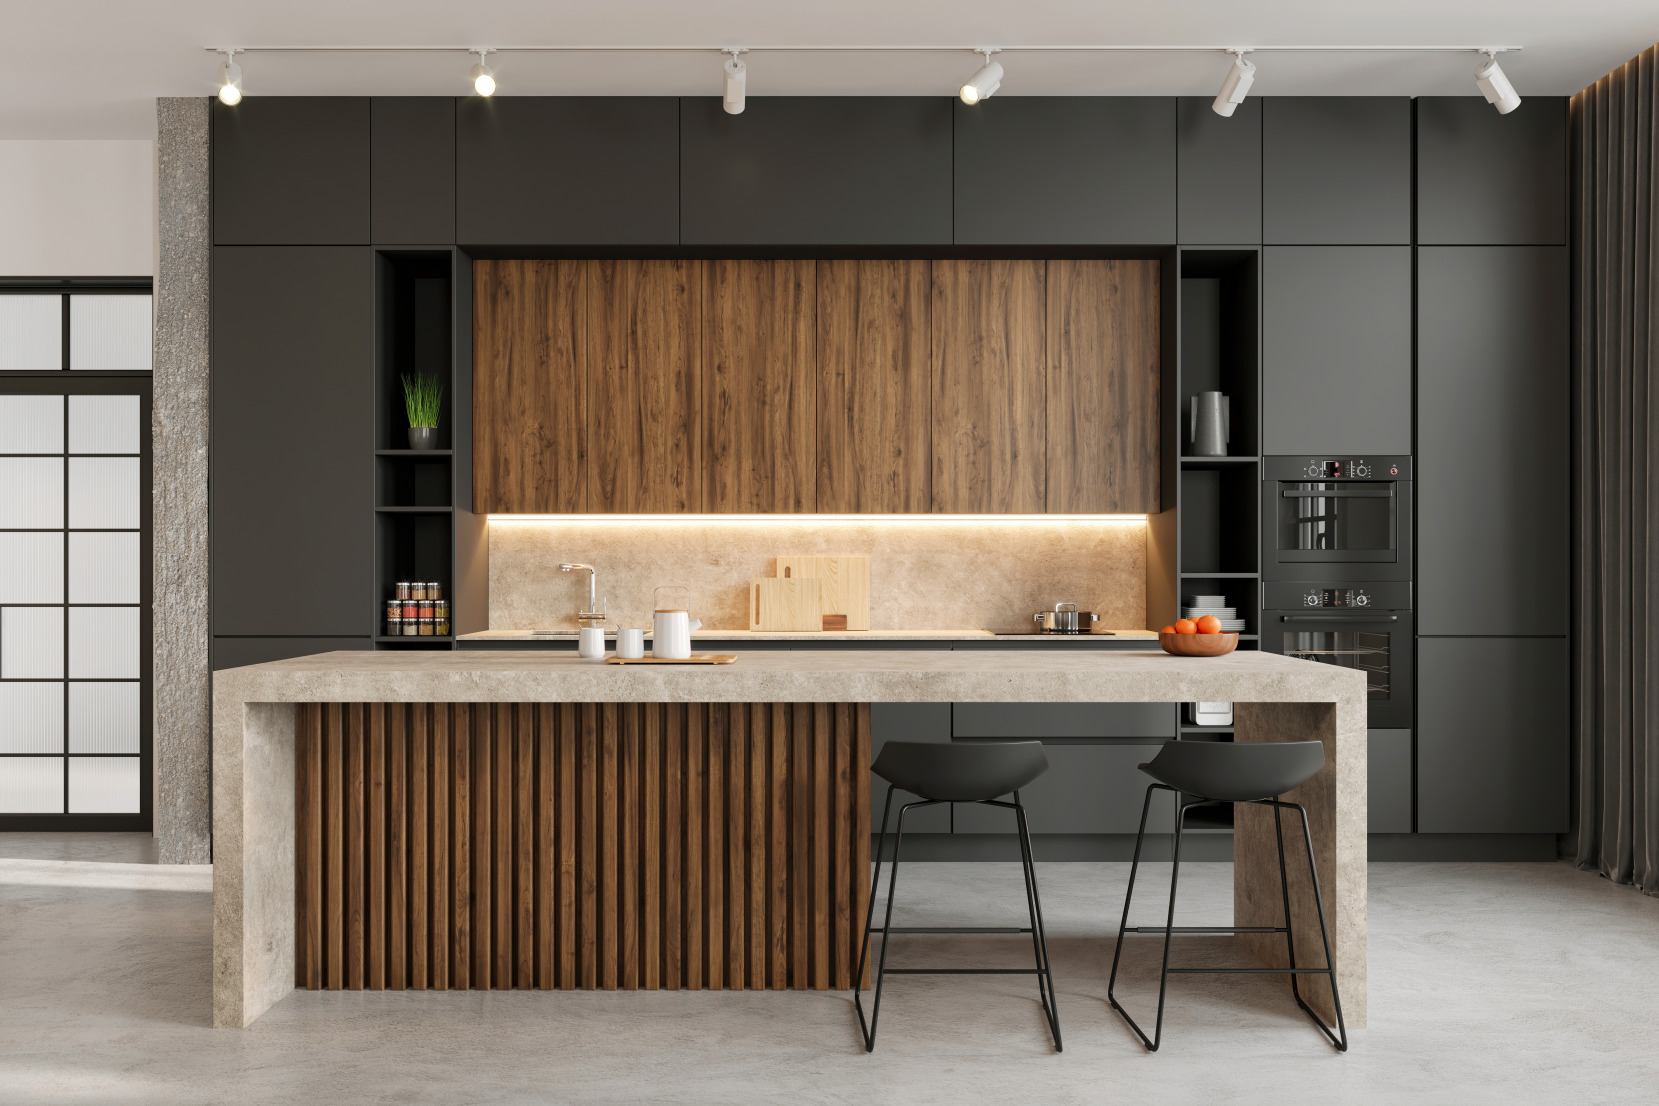 Modern loft kitchen with large kitchen island and bar chairs